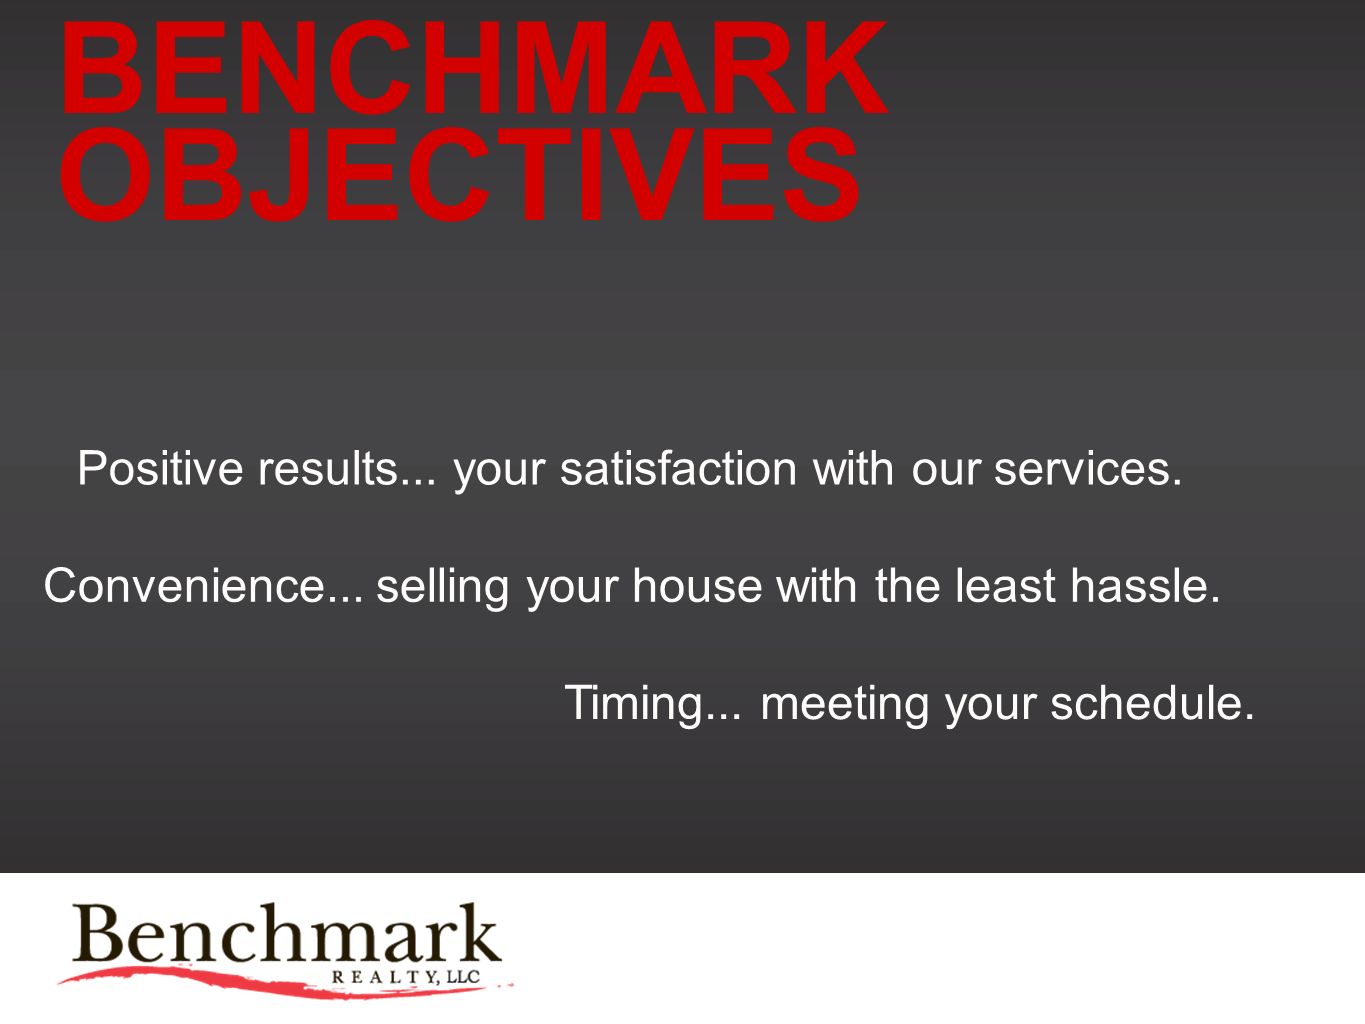 BENCHMARK OBJECTIVES Positive results... your satisfaction with our services.